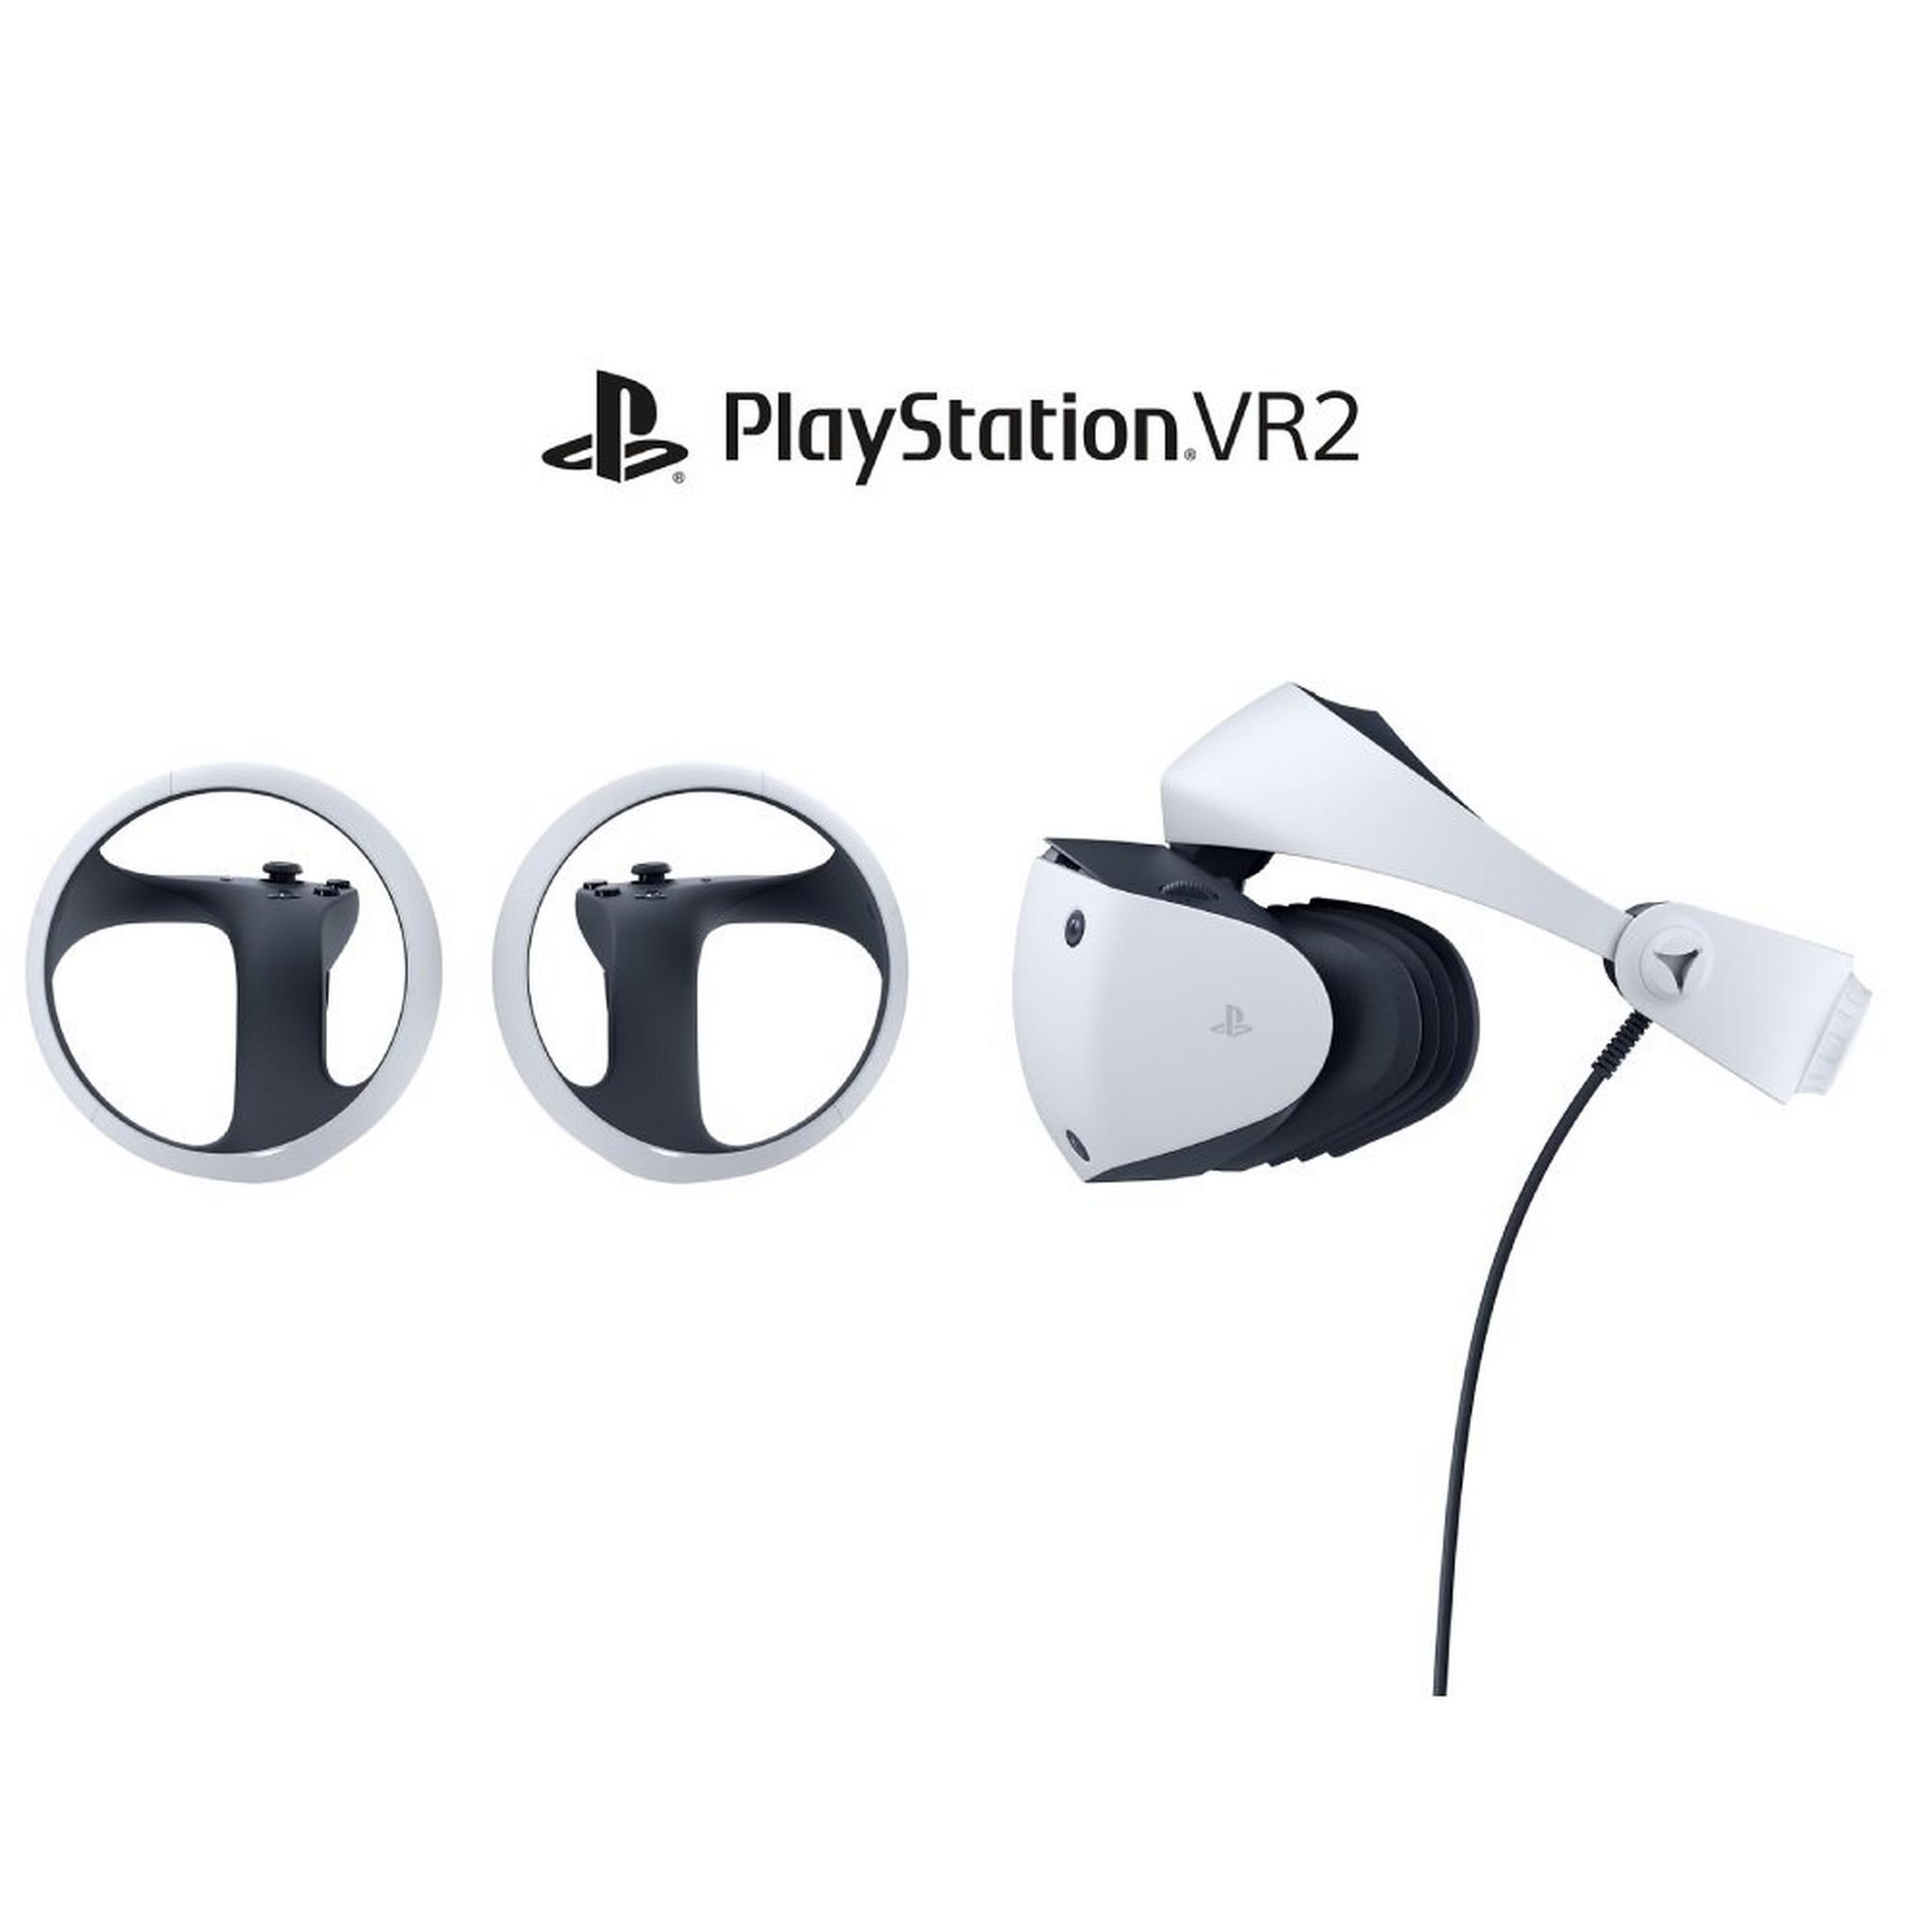 Pre-Order Now PlayStation VR2 Standalone